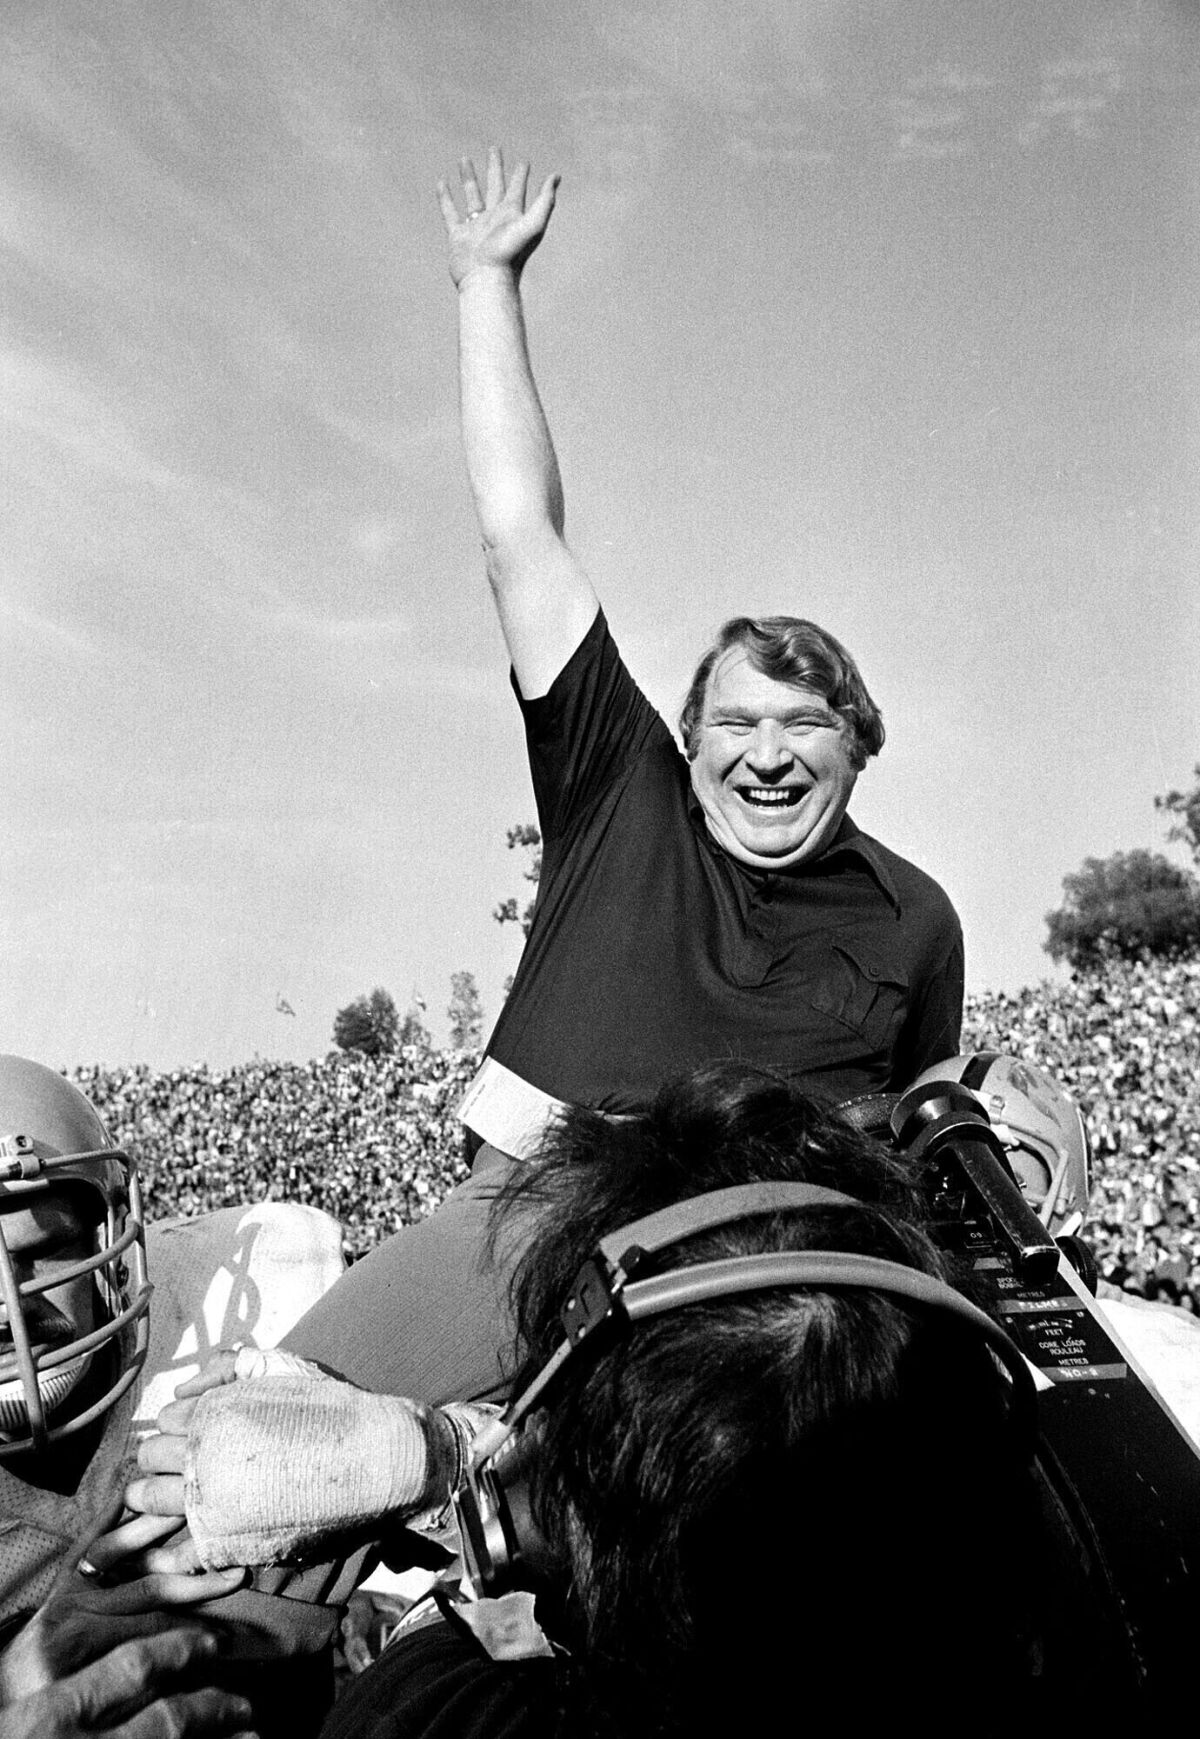 FILE - Oakland Raiders coach John Madden is carried from the field by his players after the team defeated the Minnesota Vikings in NFL football's Super Bowl XI in Pasadena, Calif., Jan. 9, 1977. After years of falling short of the title game with crushing playoff losses to rivals like Miami and Pittsburgh, the Raiders made easy work of the Minnesota Vikings in a 32-14 victory. (AP Photo/File)